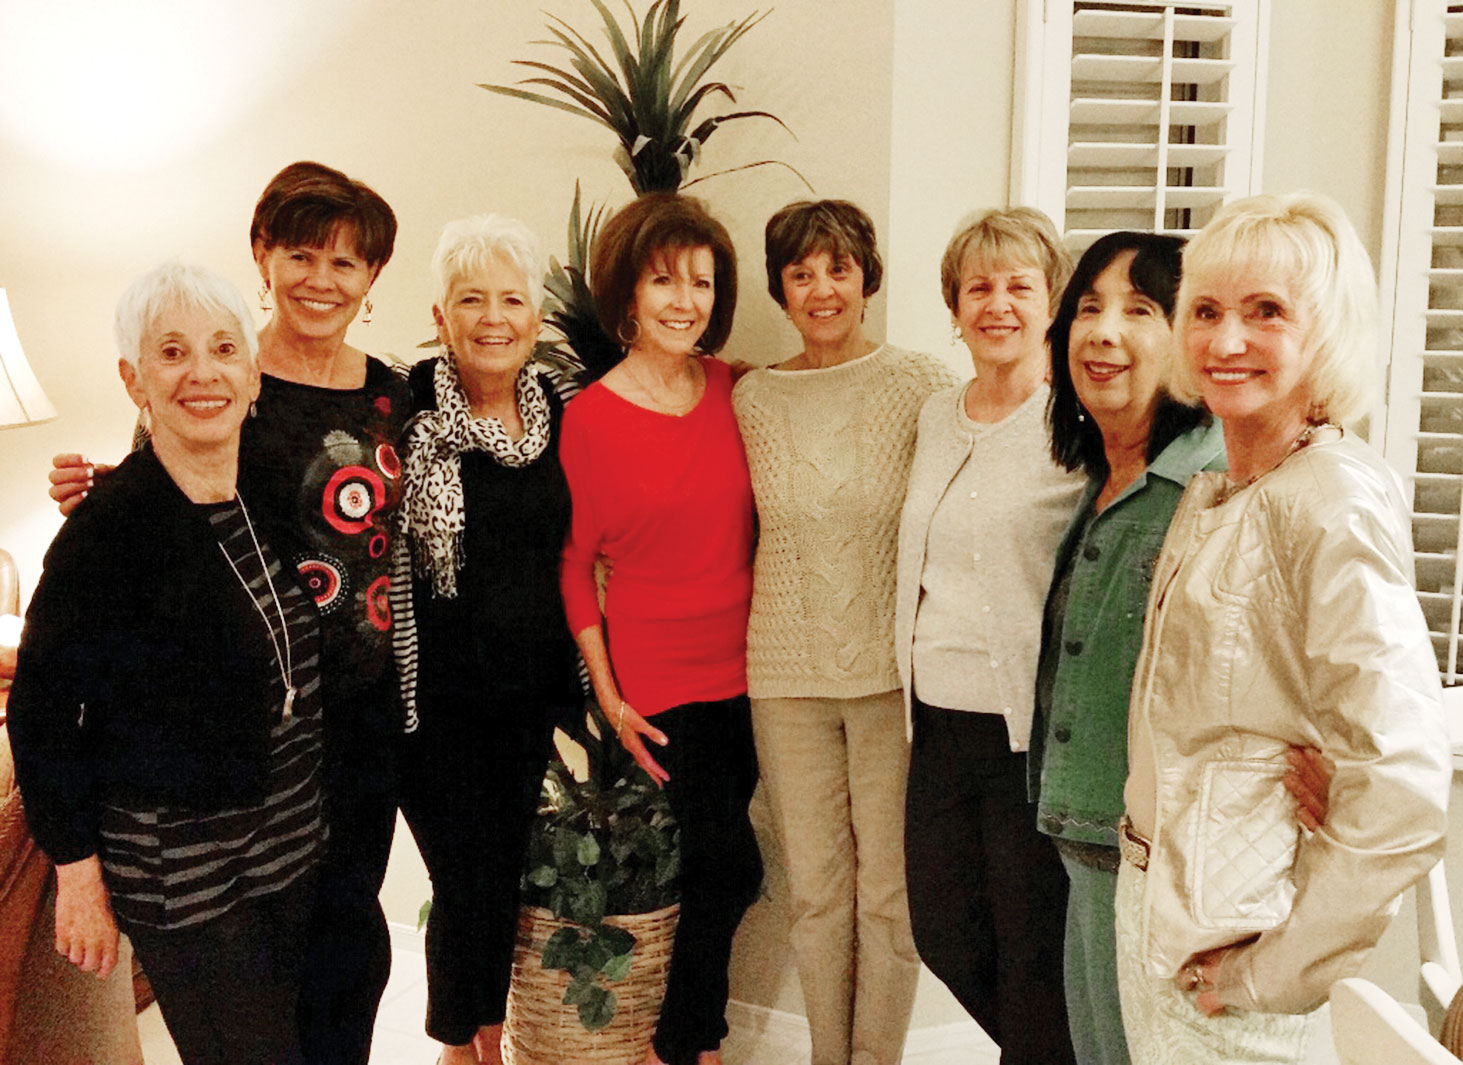 Vivian Herman, Dianne Bank, Claudia Booth, Ann Kurtz, Janifer Farquhar, Laurie Page, Caryl Mobley and Linda Schuttler